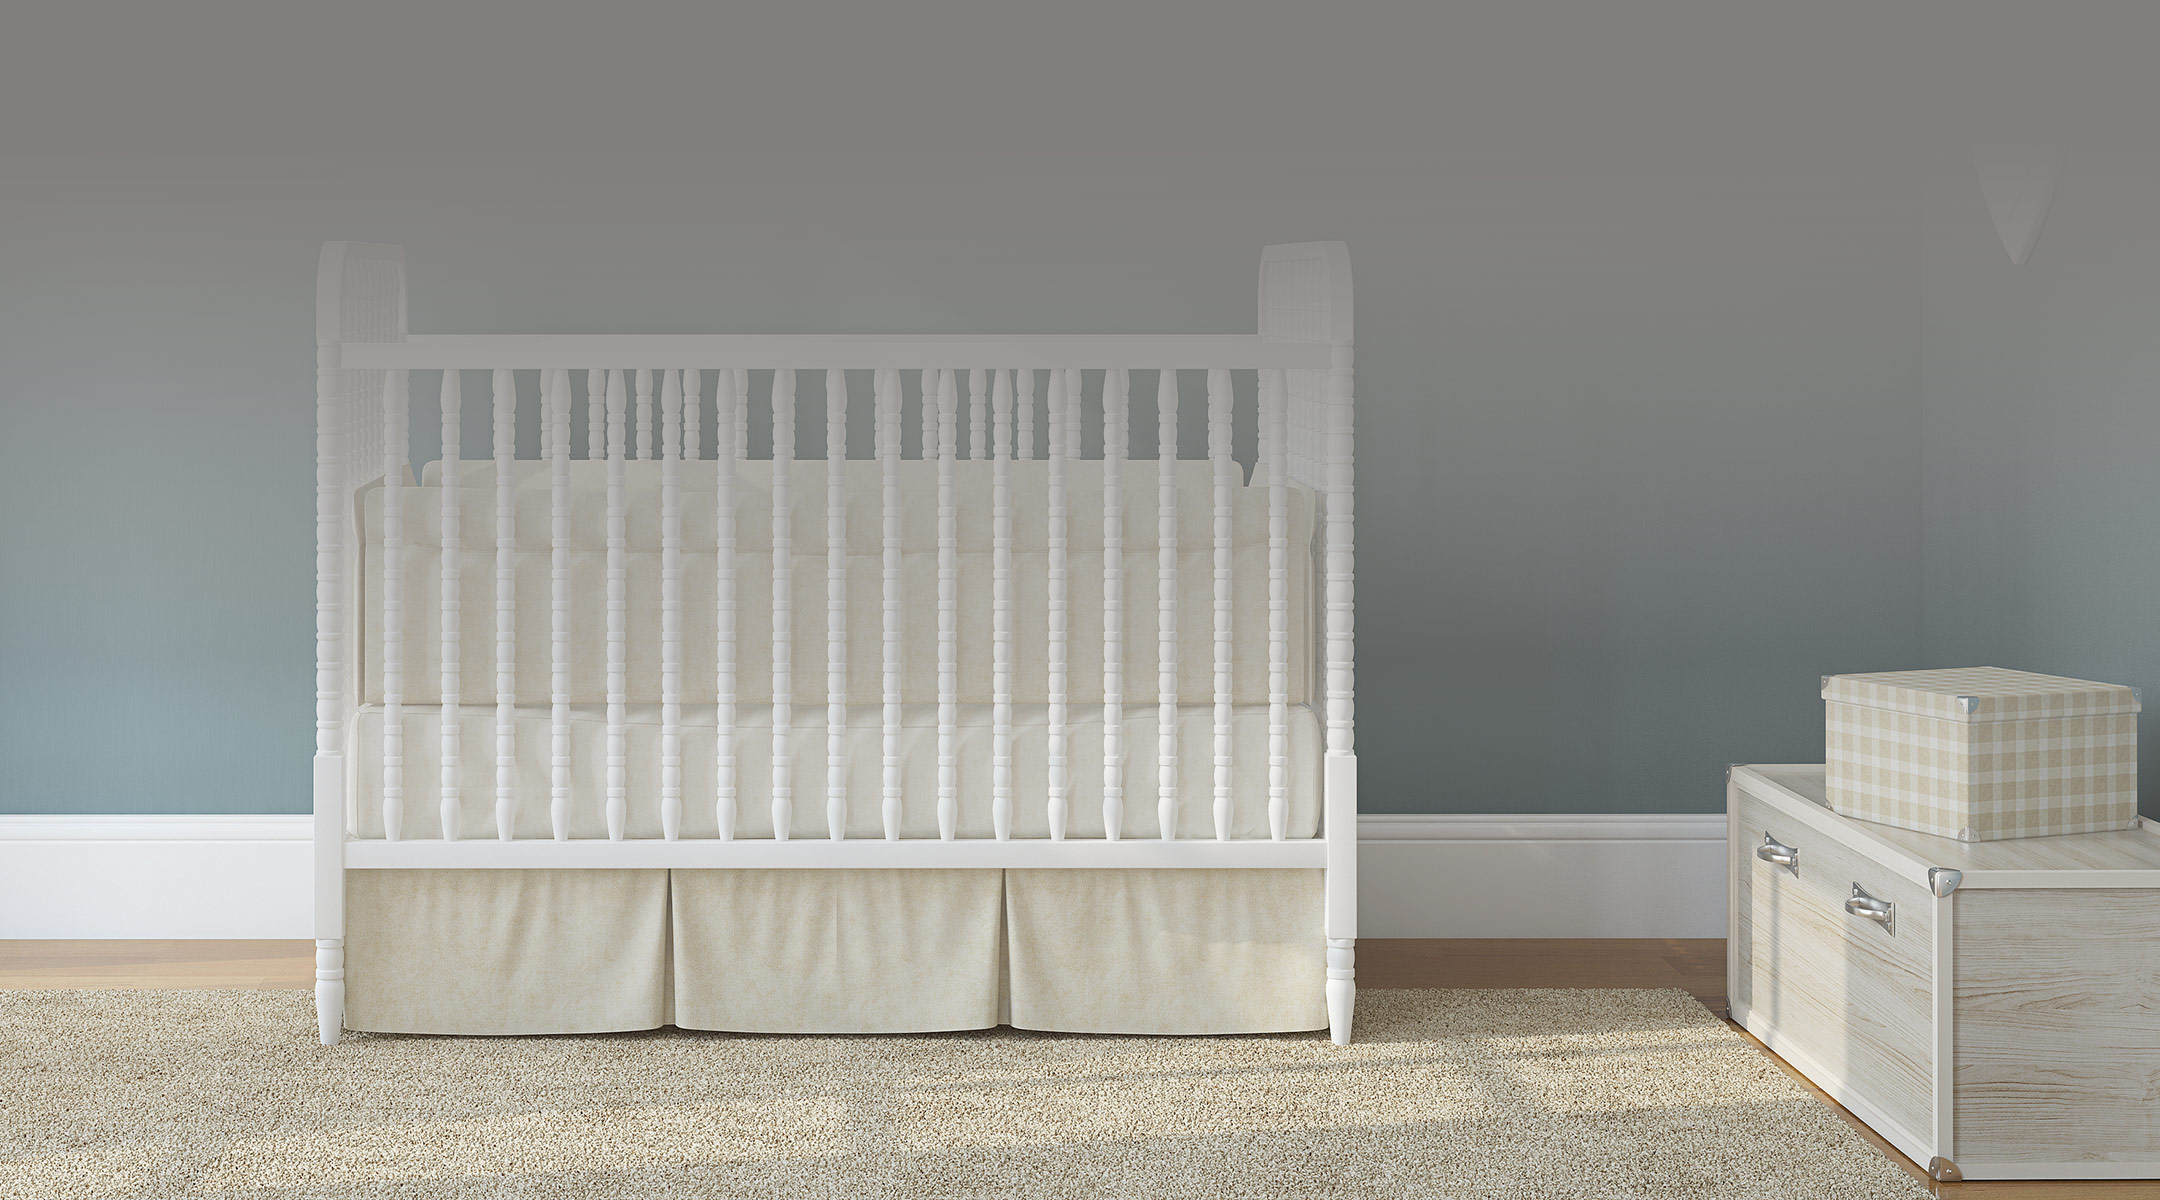 crib bumpers are banned in new york